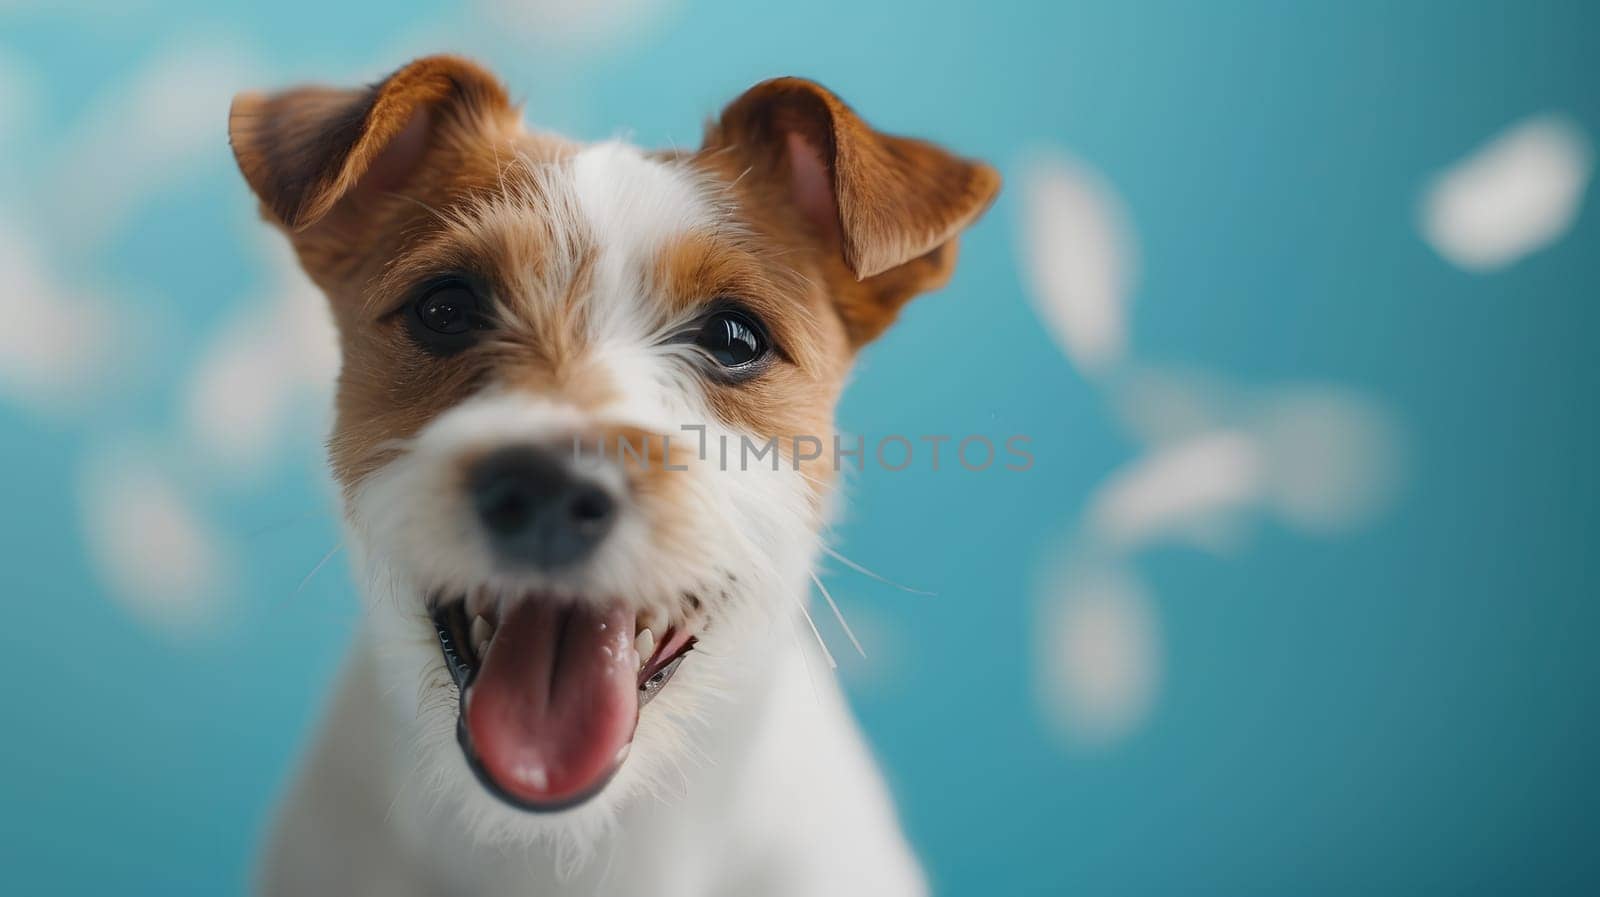 a brown and white dog is sitting on a blue background with its tongue hanging out by Nadtochiy